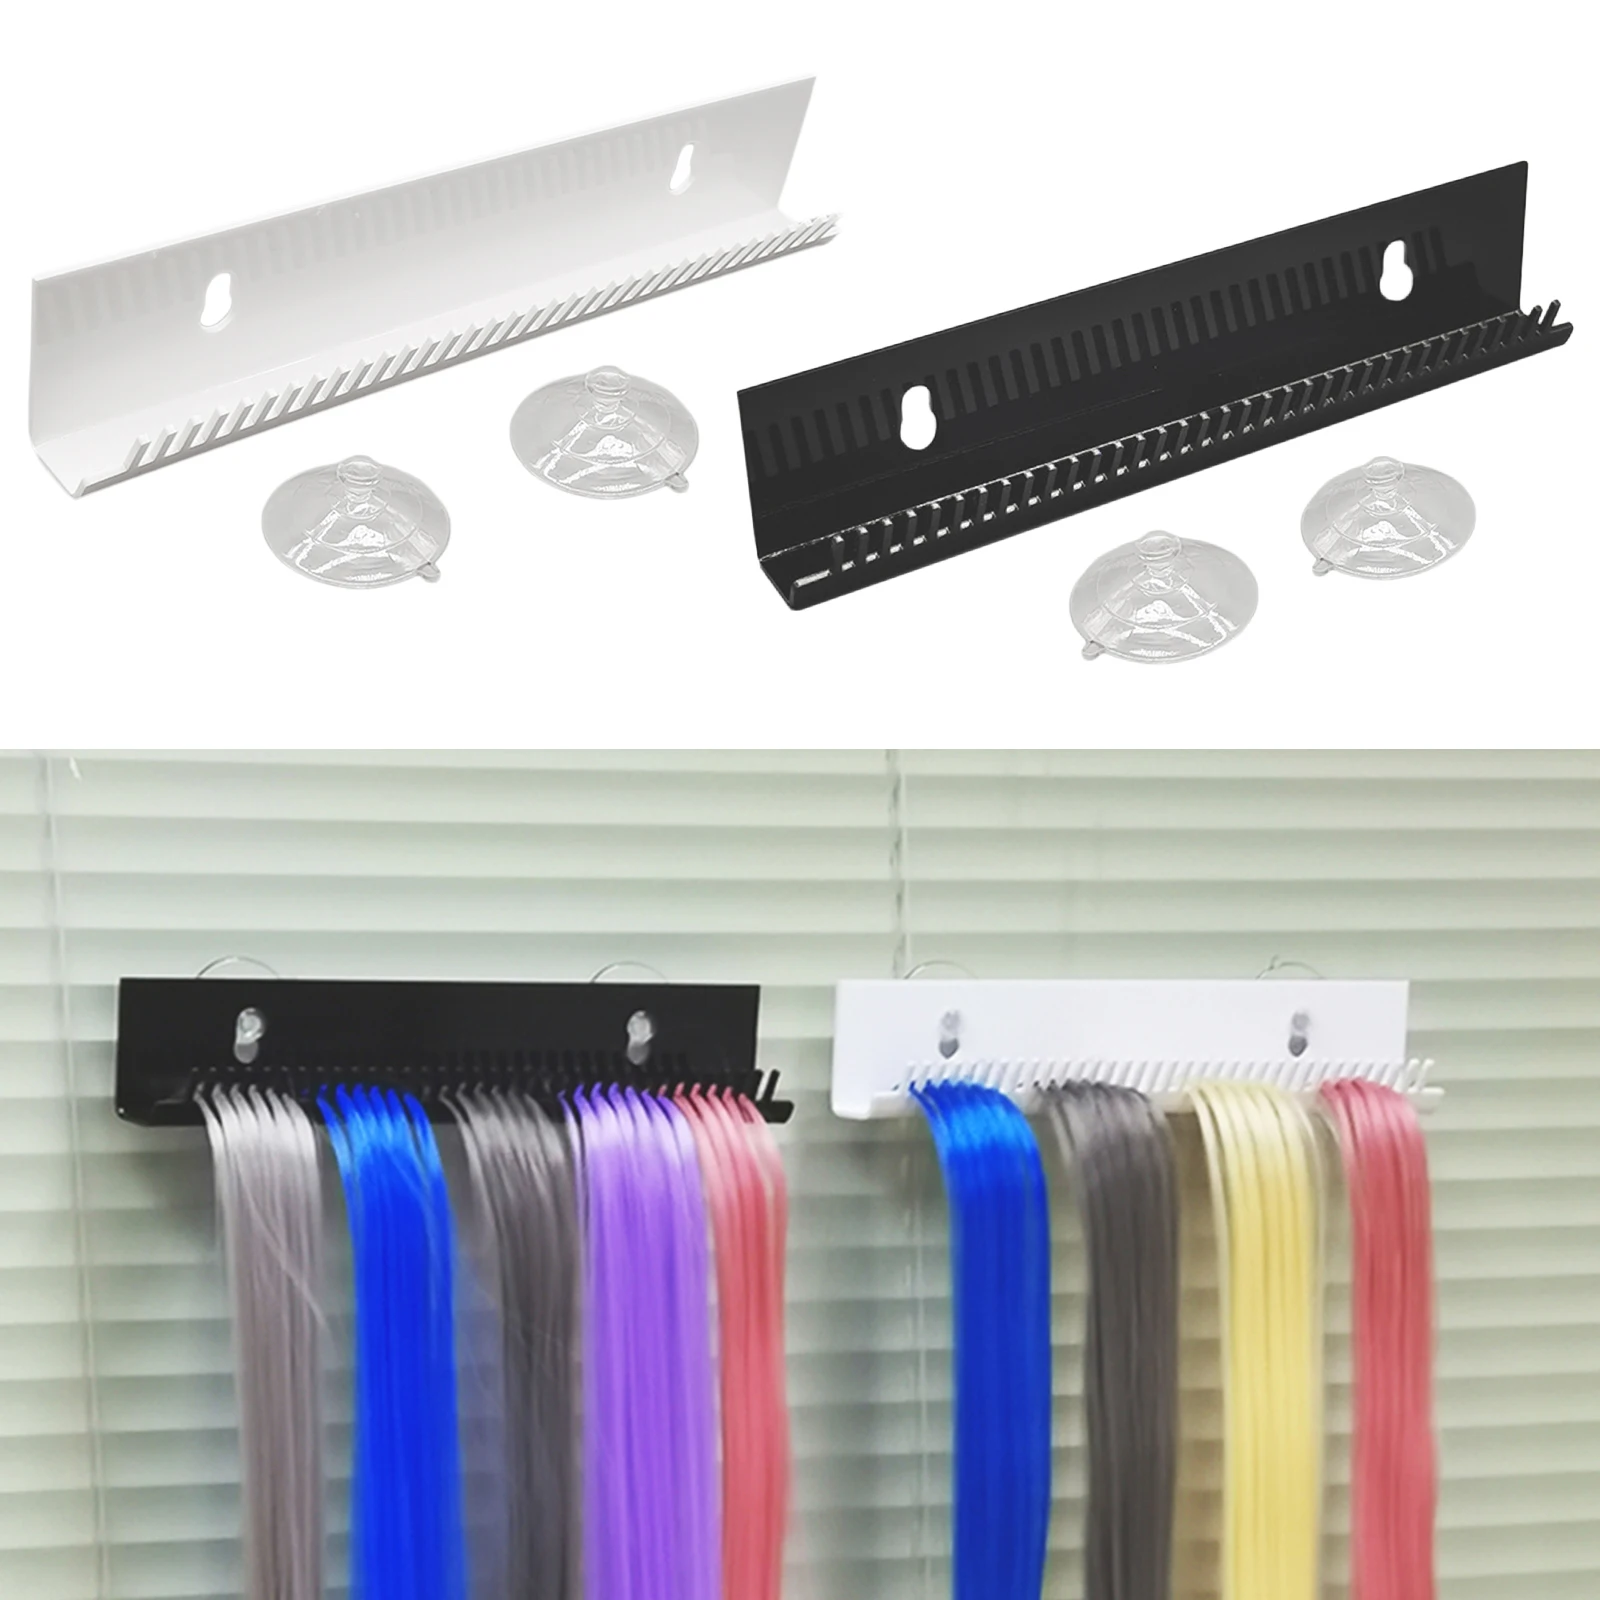 Same day shipping Professional Hair Extension Storage Holder Braid Hanger for Rack Max 55% OFF